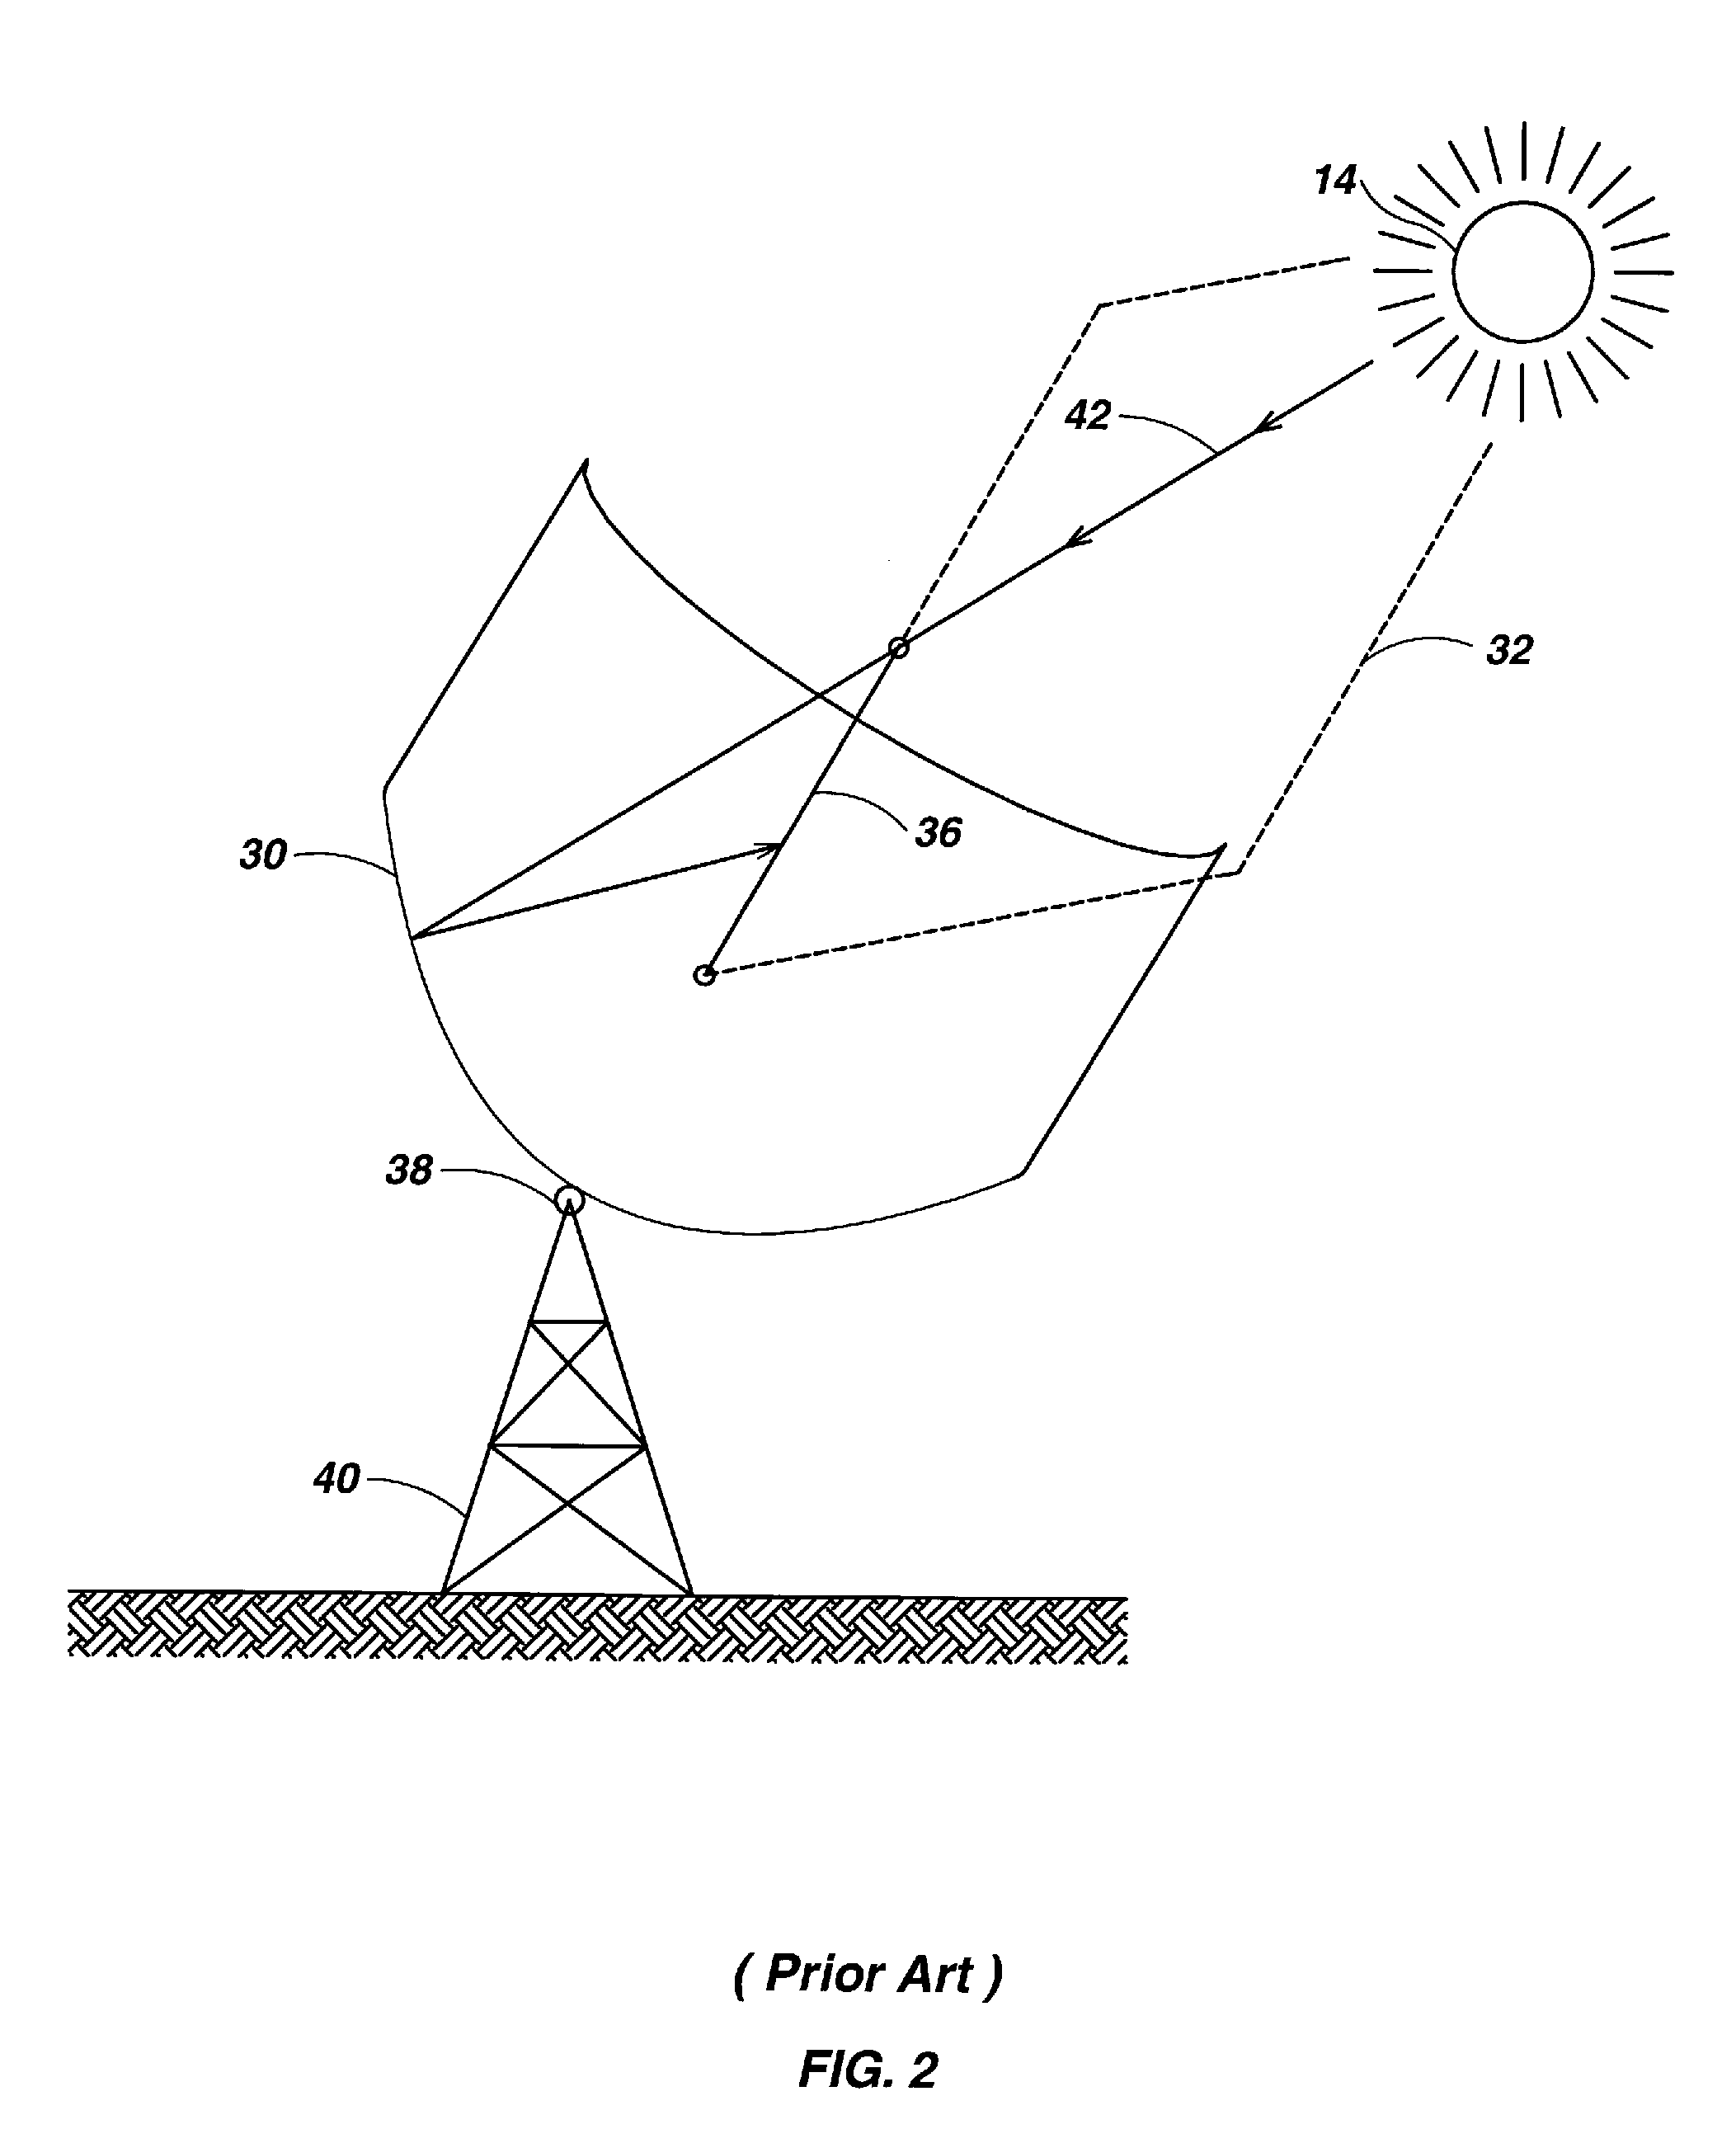 Solar Collection Apparatus and Methods Using Accelerometers and Magnetic Sensors